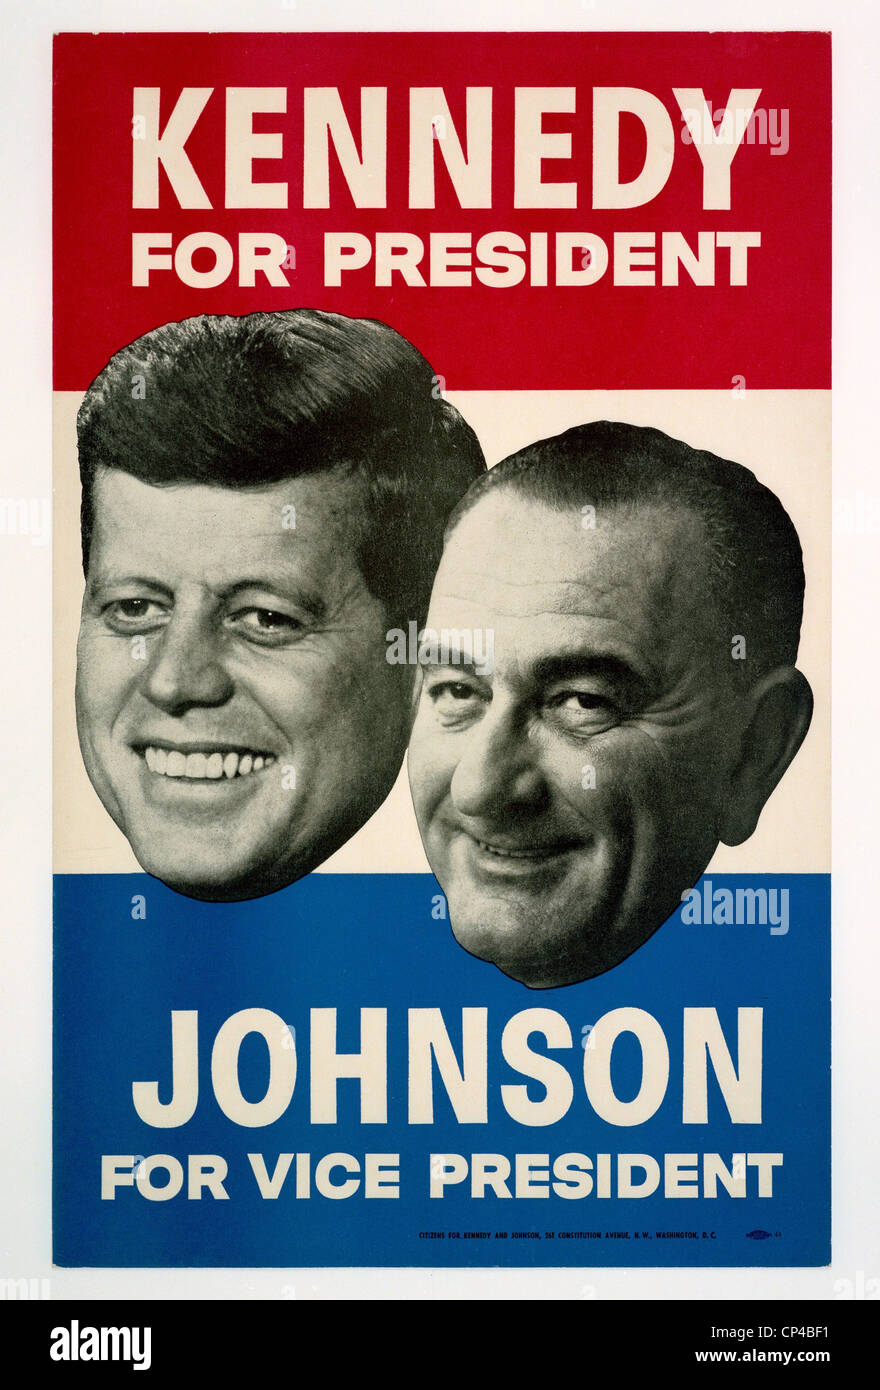 Kennedy for President/Johnson for Vice President. 1960 Democratic Presidential Campaign Poster. Stock Photo